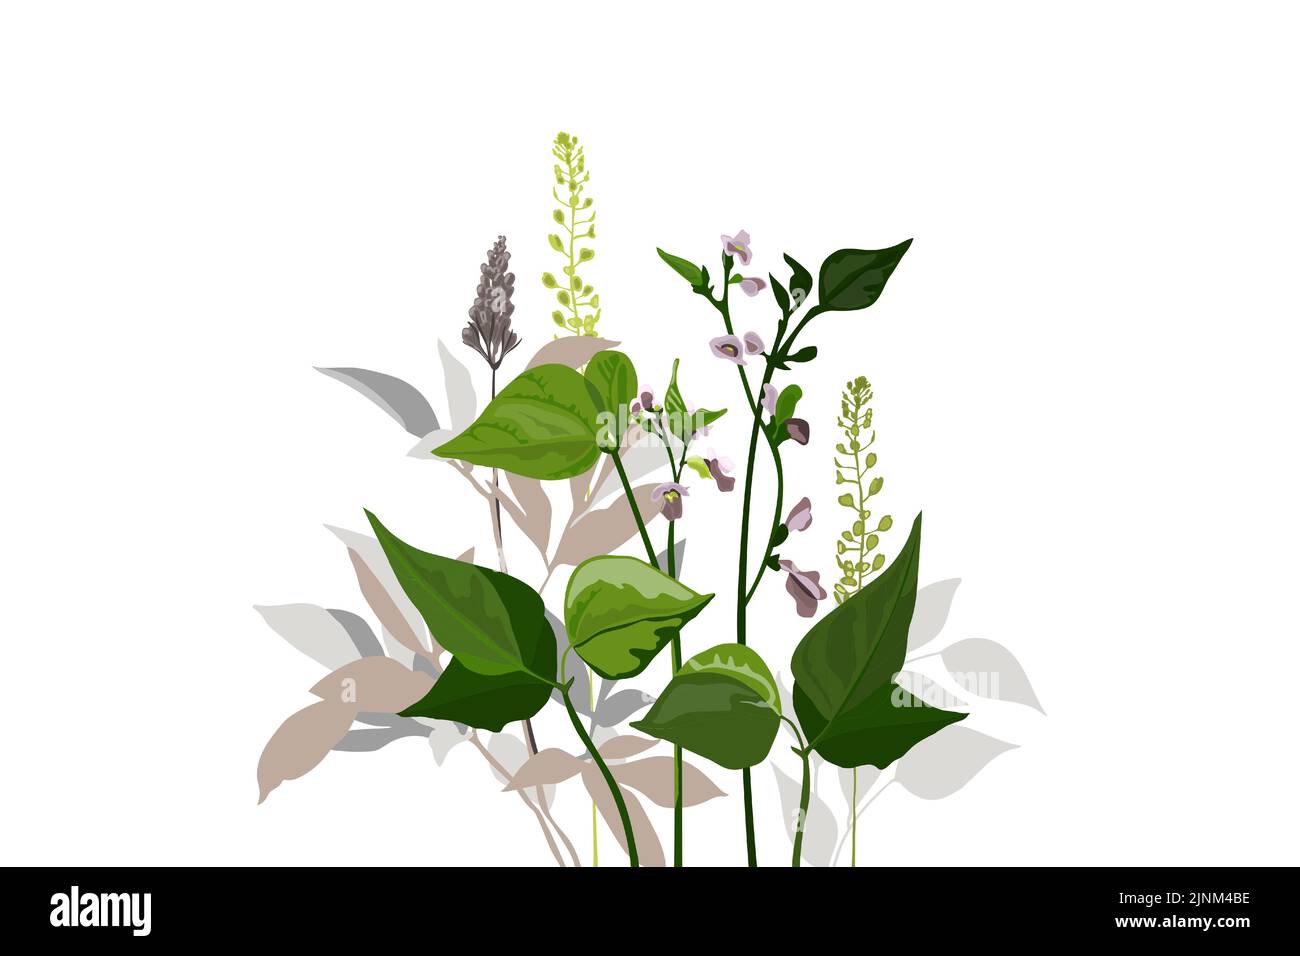 Beans growing flowers Stock Vector Images - Alamy